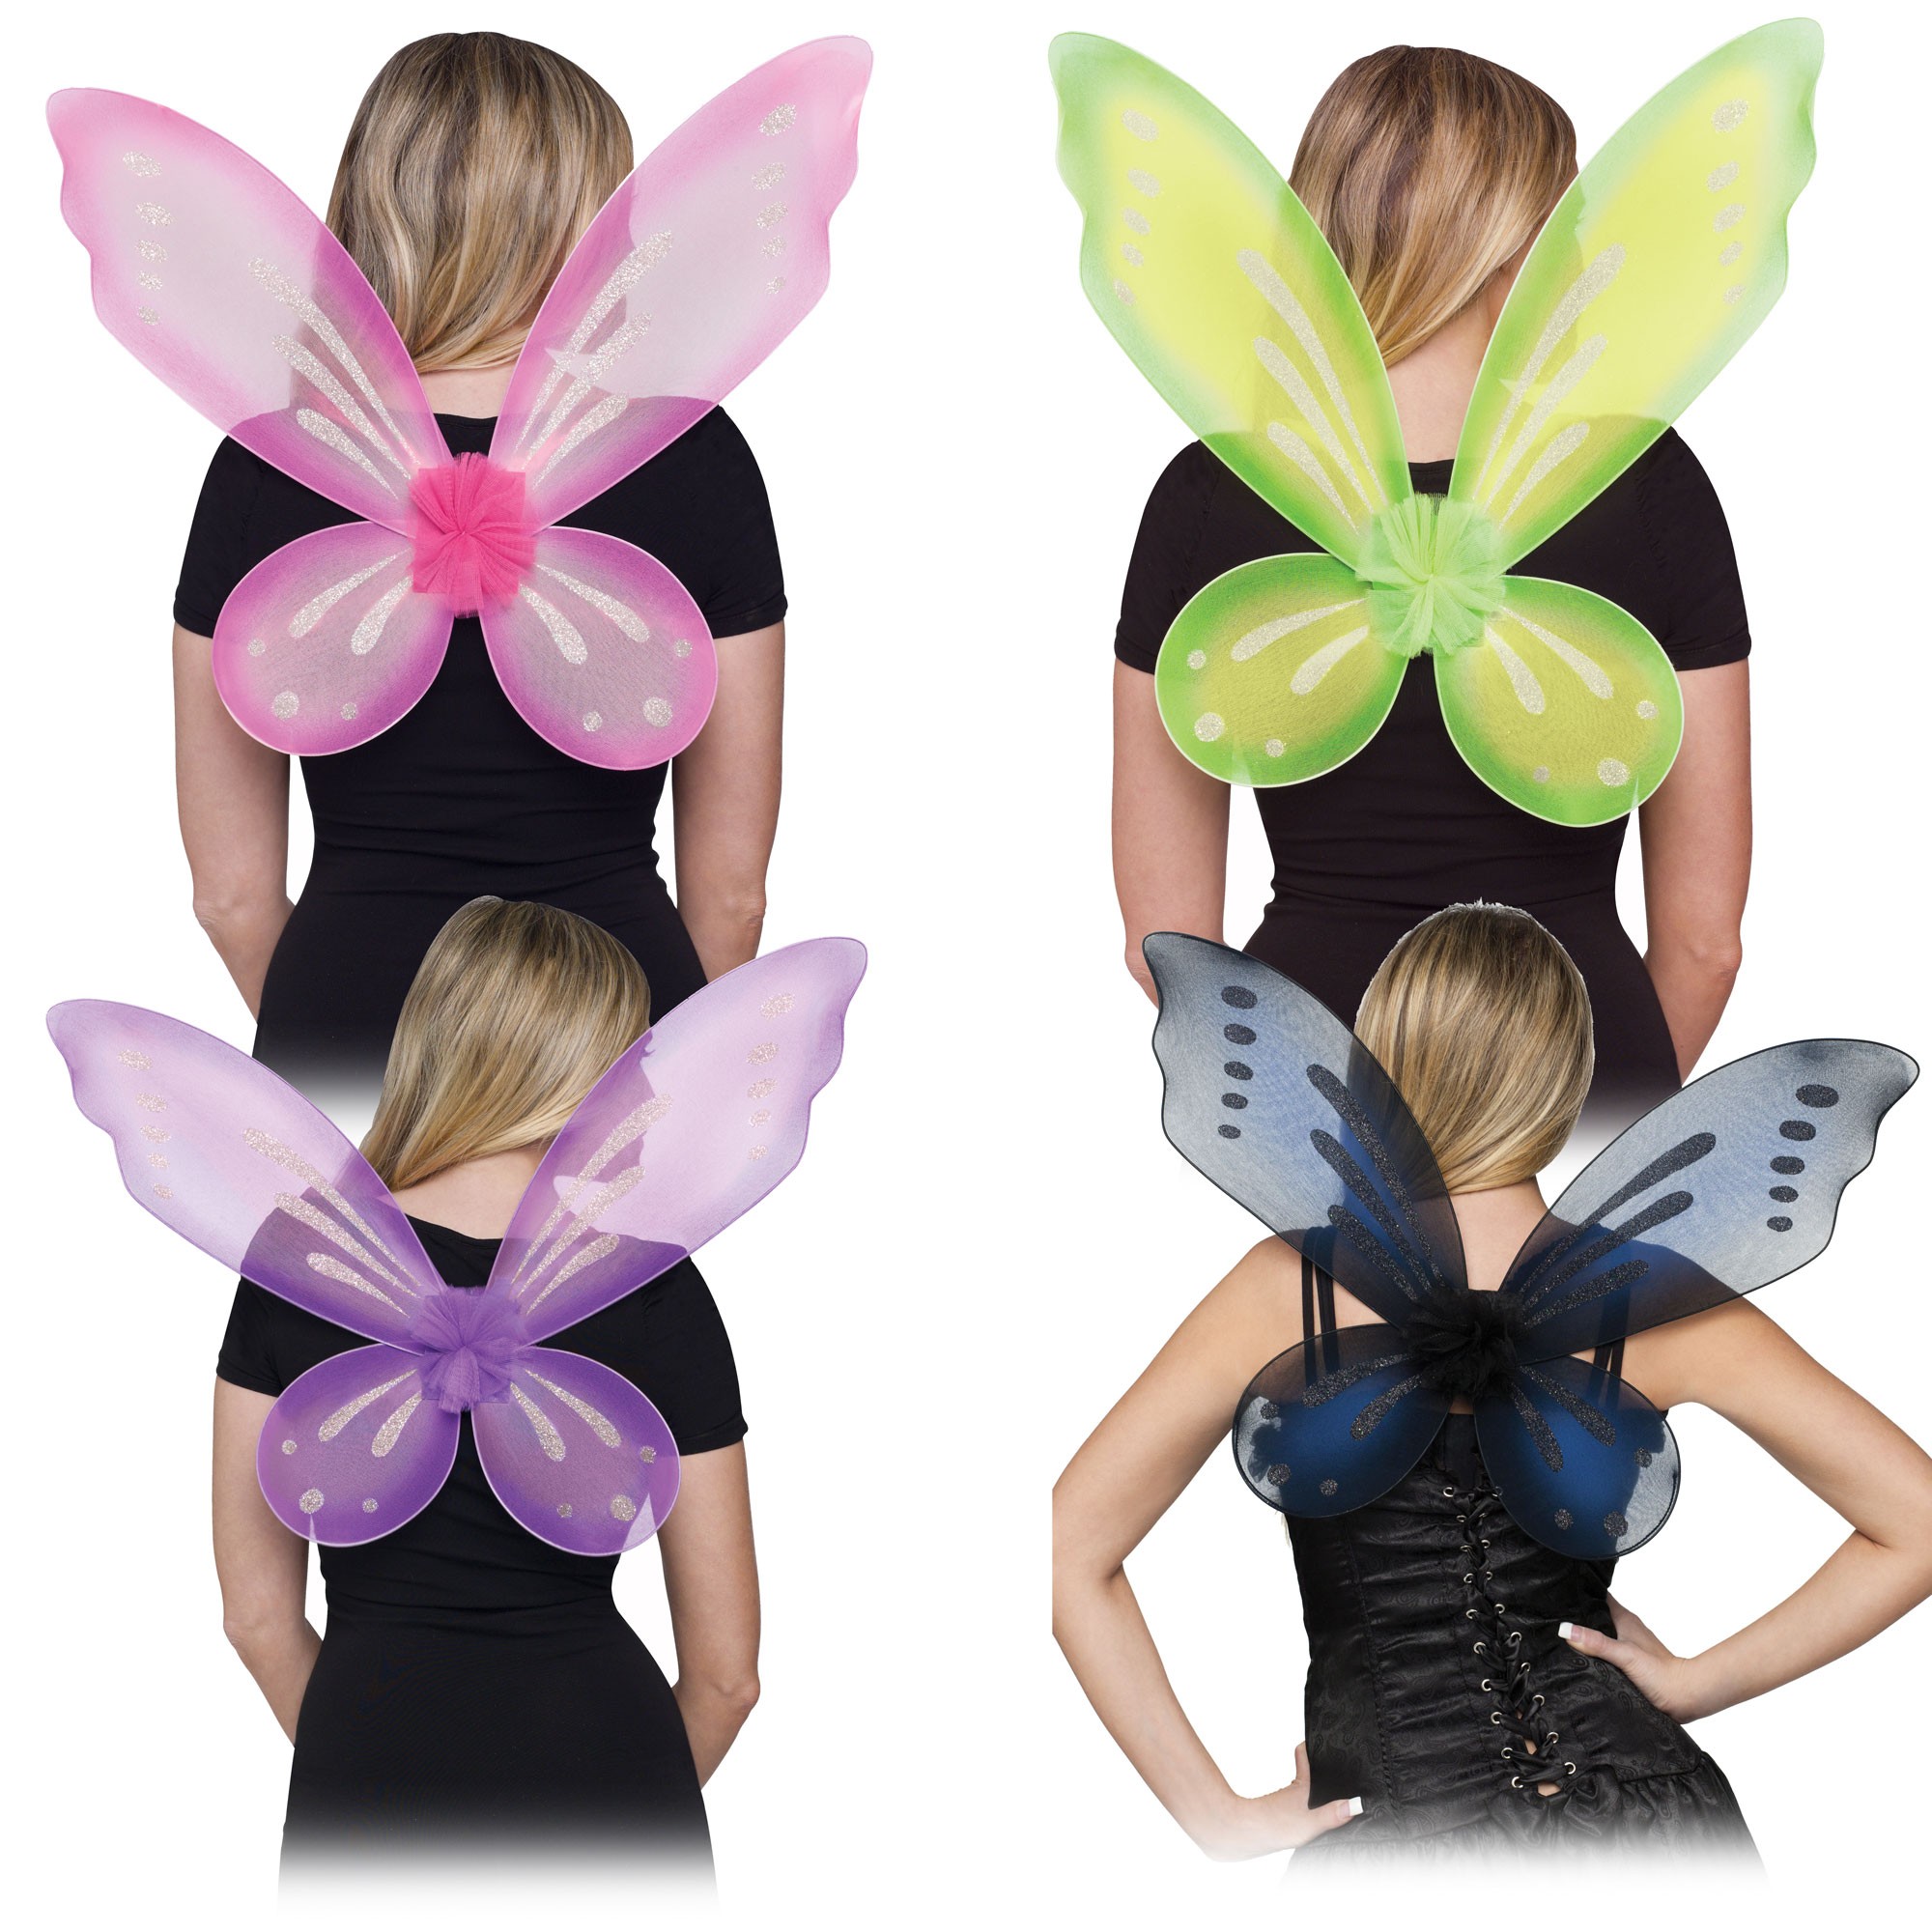 Clothing Gender-Neutral Adult Clothing Costumes OOAK Unique Green Iridescent Adult Fairy Wings Woodland Fairy Costume 